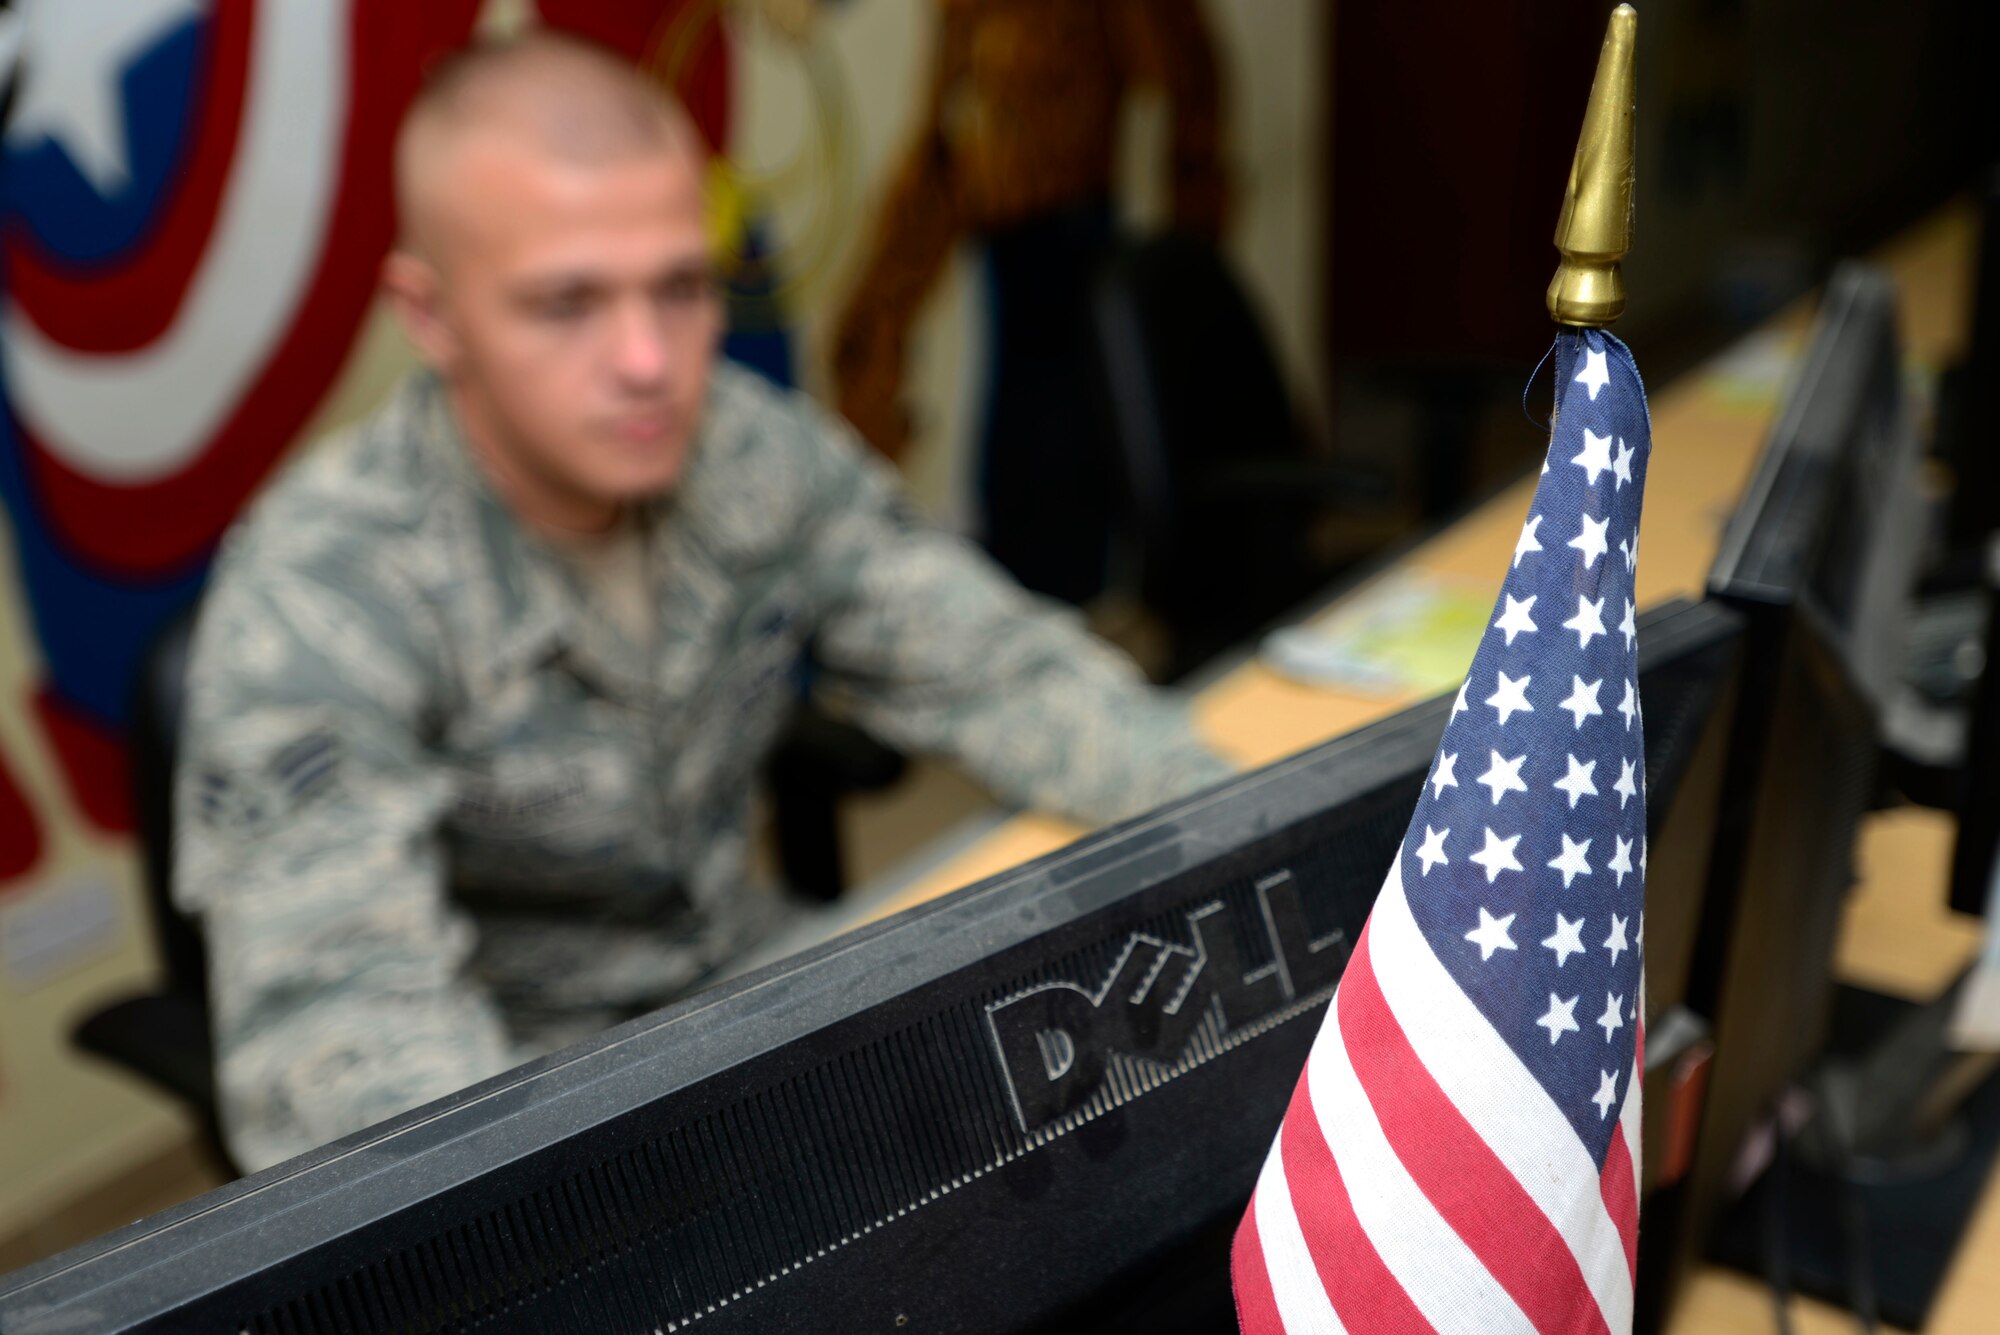 U.S. Air Force Senior Airman Vadim Poleanschi, a 386th Expeditionary Logistic Readiness Squadron logistic specialist, displays an American flag behind his computer monitor at an undisclosed location in Southwest Asia on June 3, 2015. Poleanschi applied to become a United States citizen in late 2013, after joining the AF. (U.S. Air Force photo by Senior Airman Racheal E. Watson/Released)